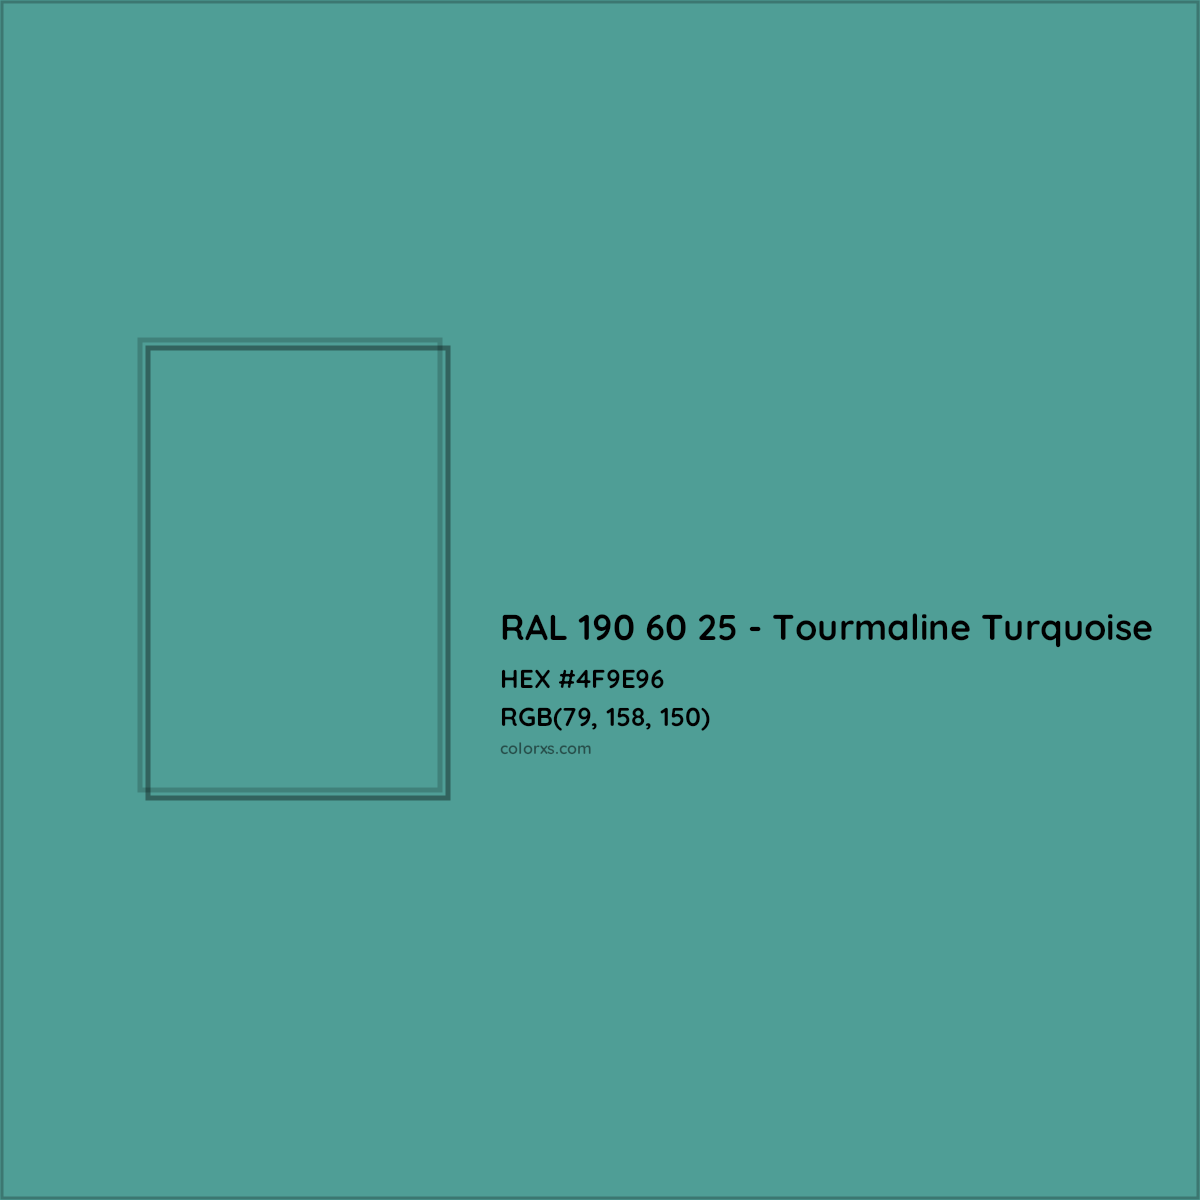 HEX #4F9E96 RAL 190 60 25 - Tourmaline Turquoise CMS RAL Design - Color Code